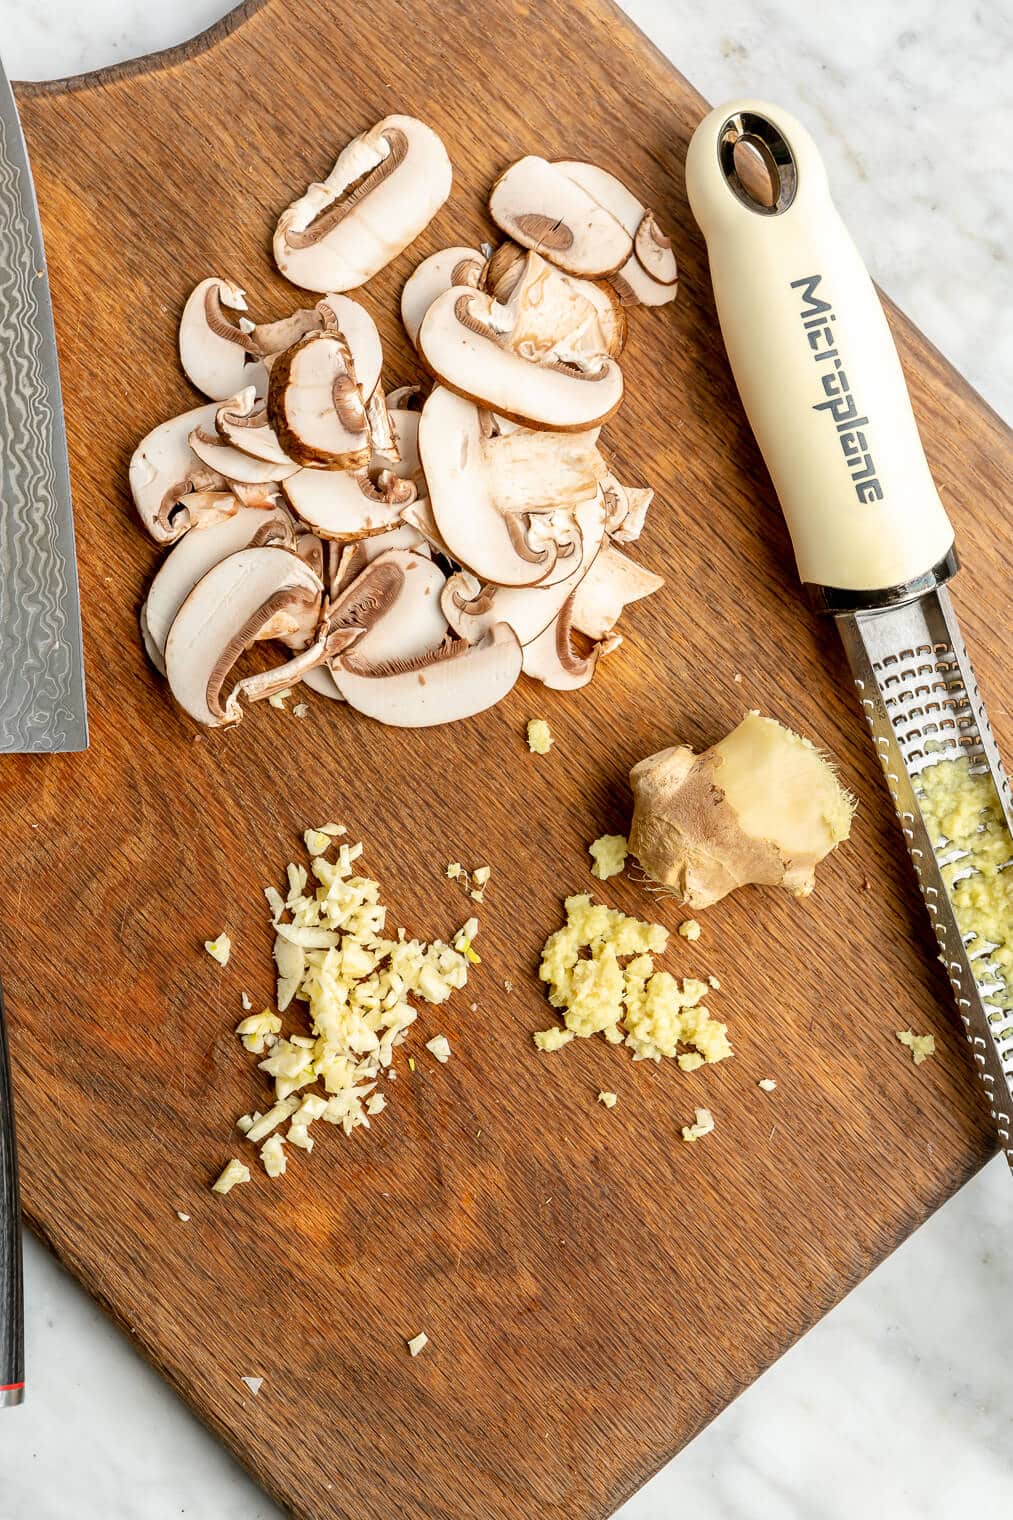 Sliced mushrooms, minced garlic, and grated ginger on a wooden cutting board.